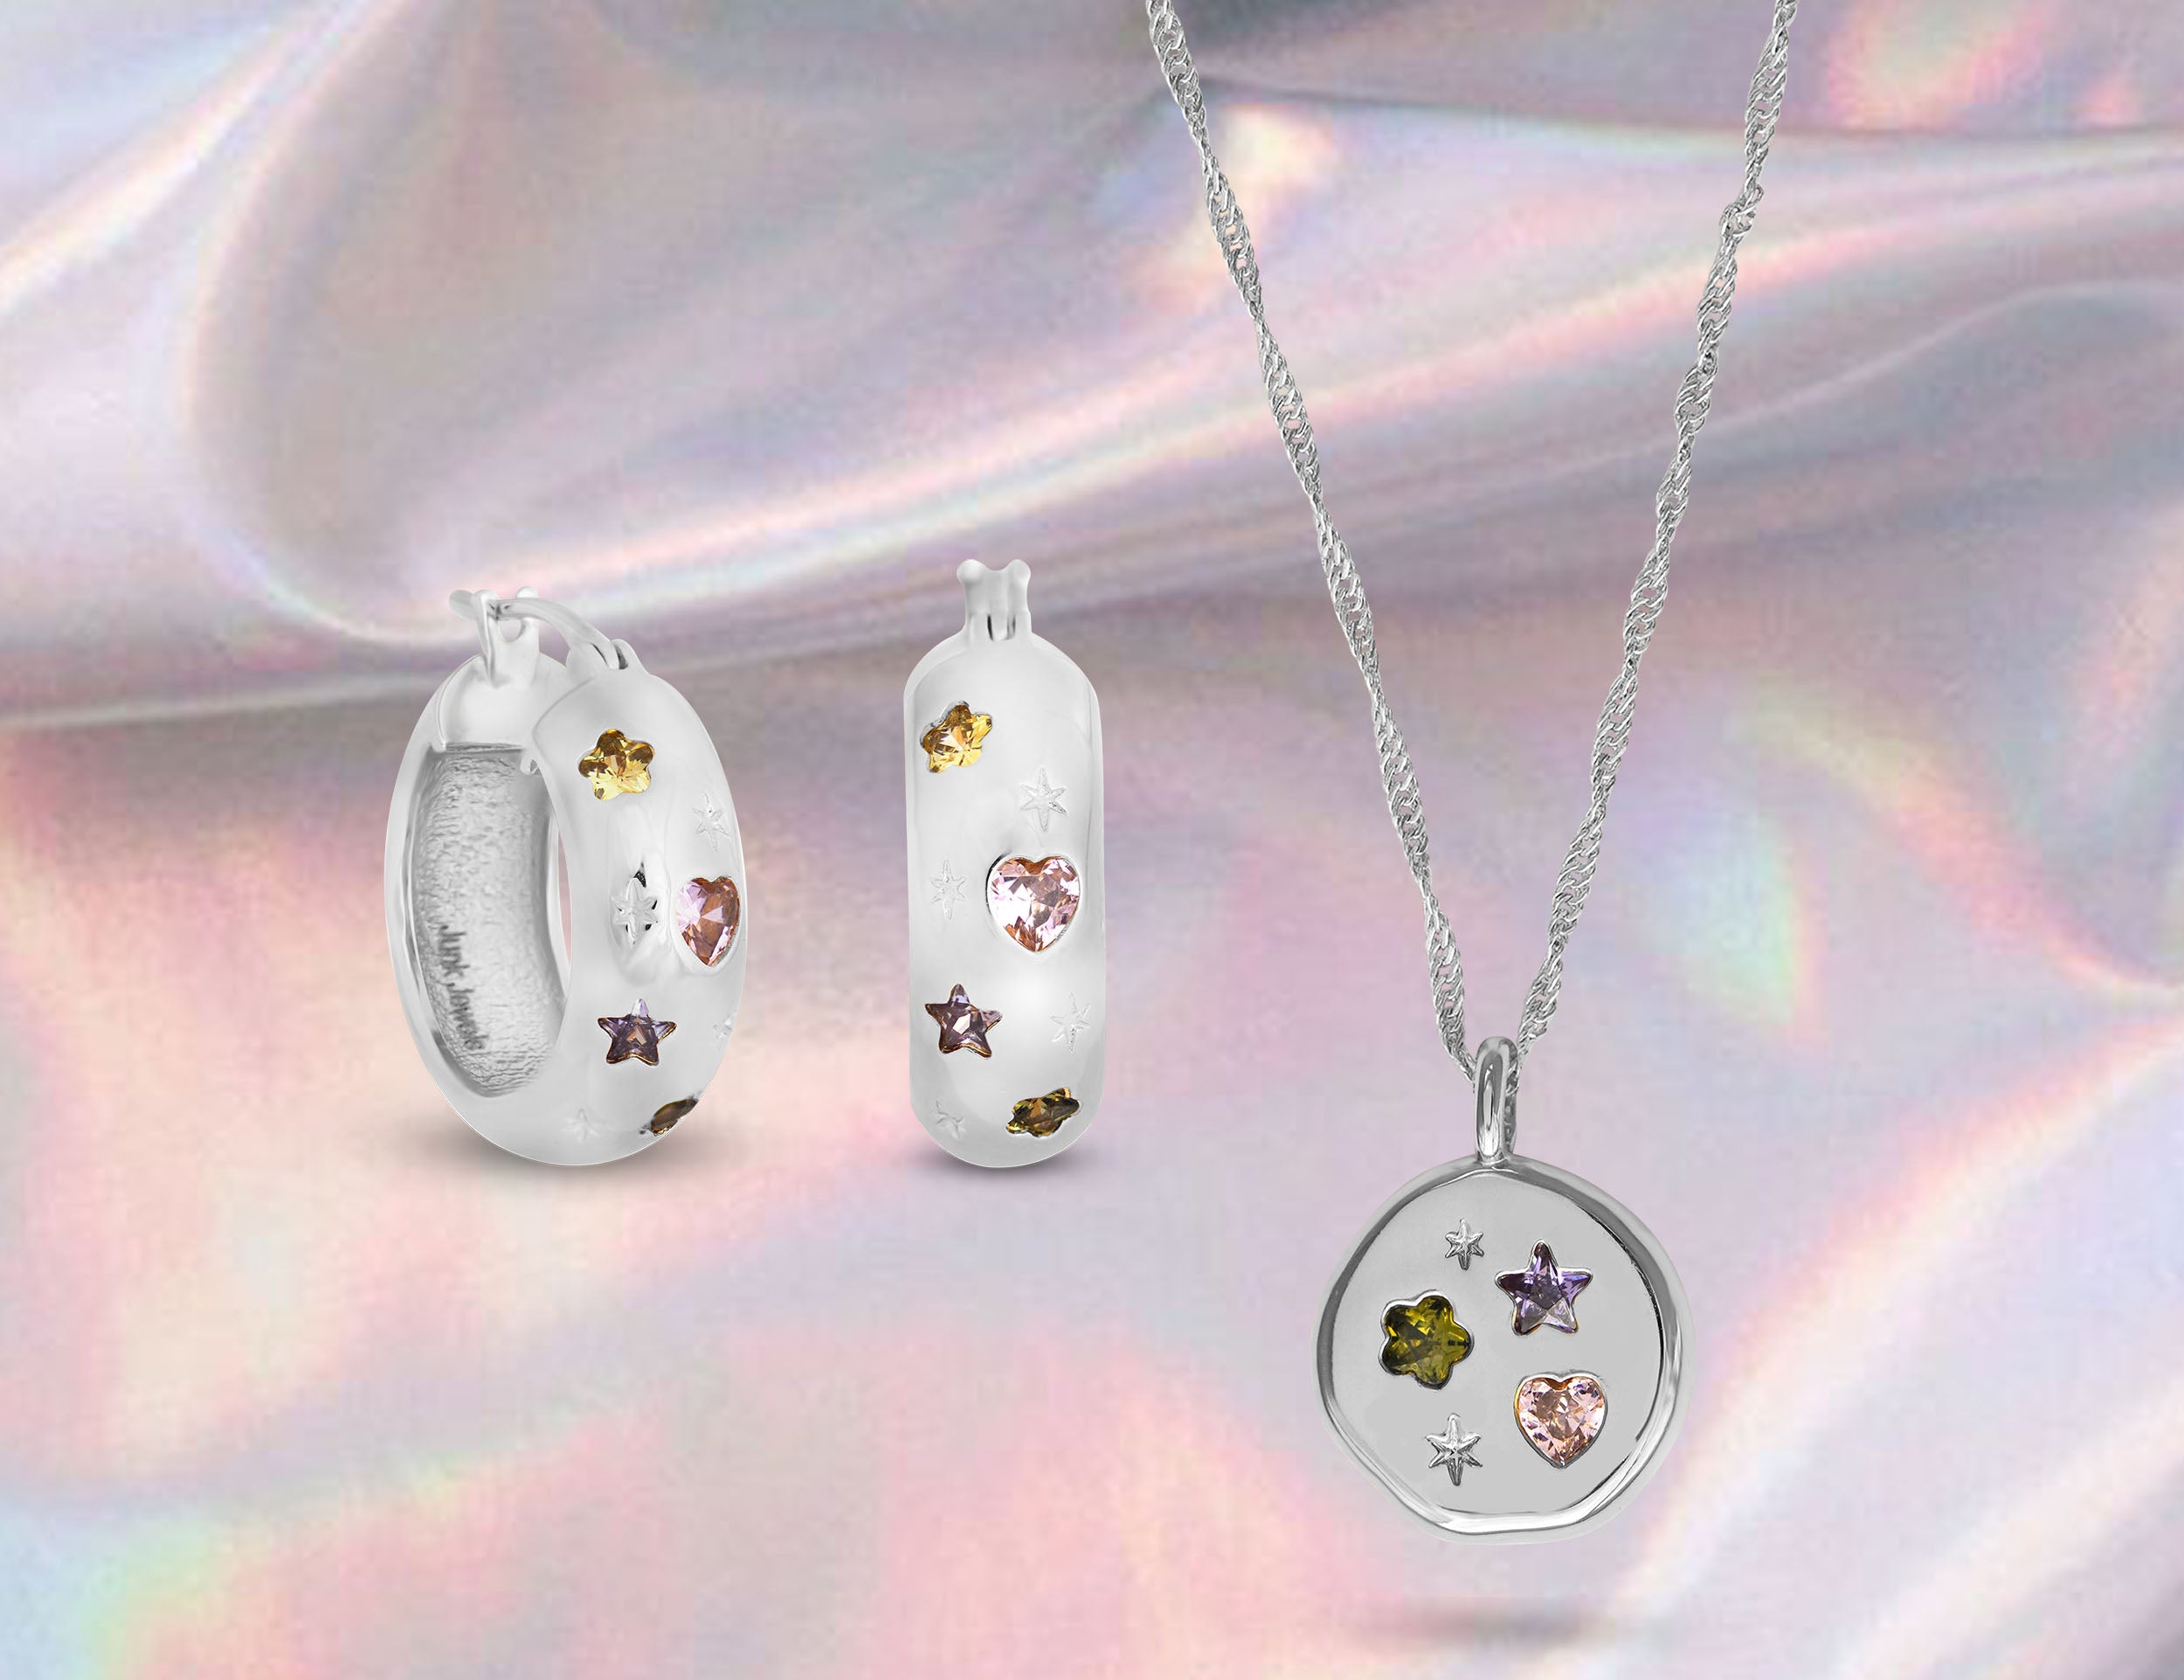 Jewelled Dreams Necklace and Earring Gift Set